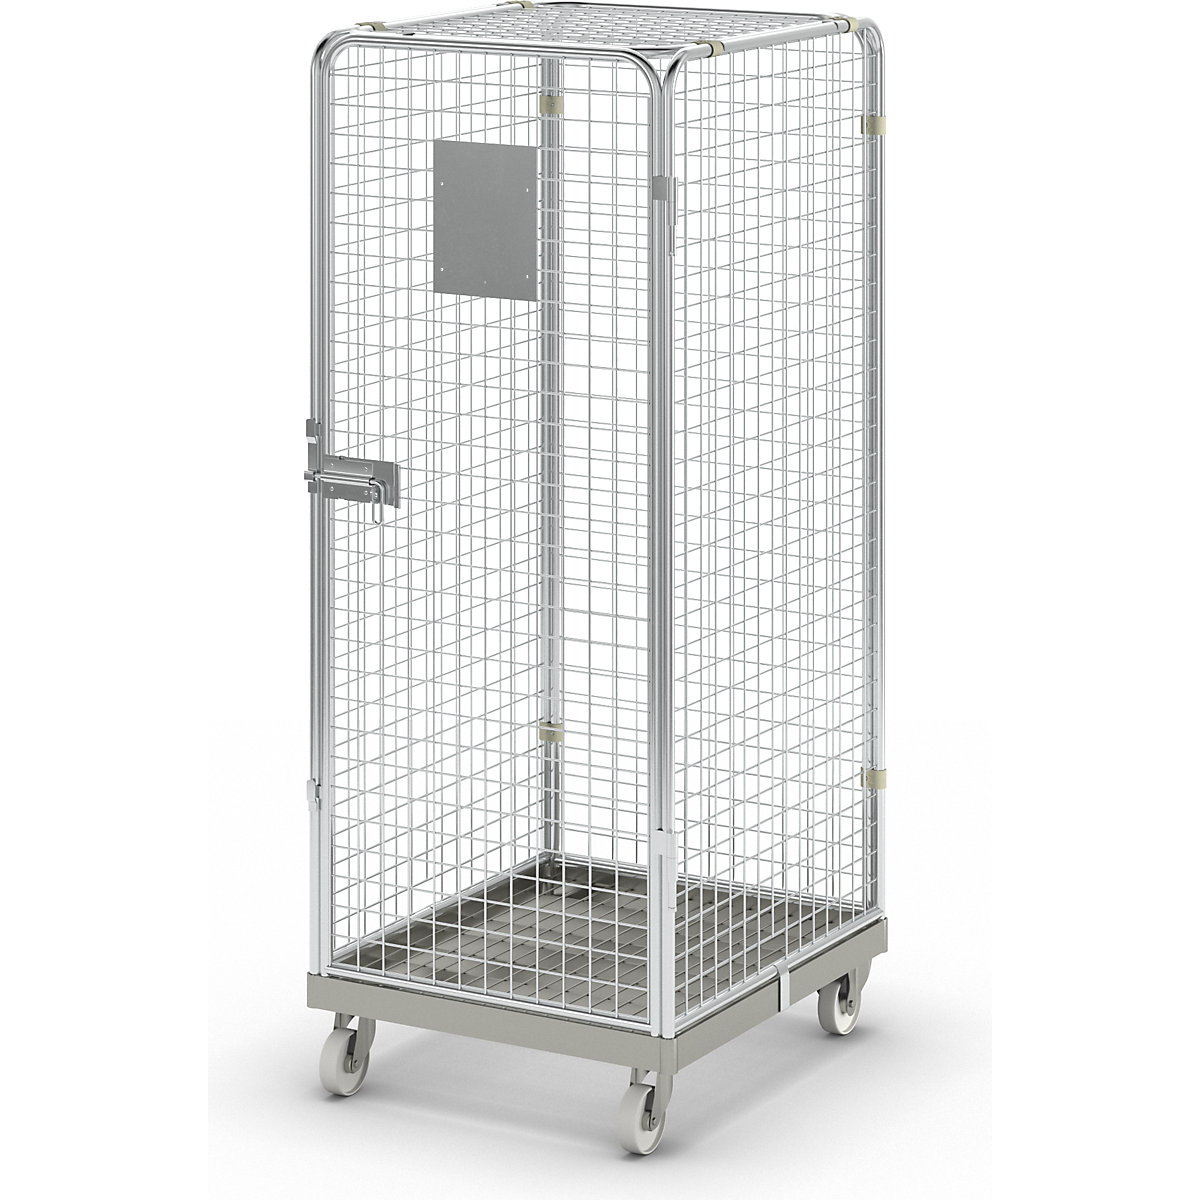 Security steel container with steel dolly